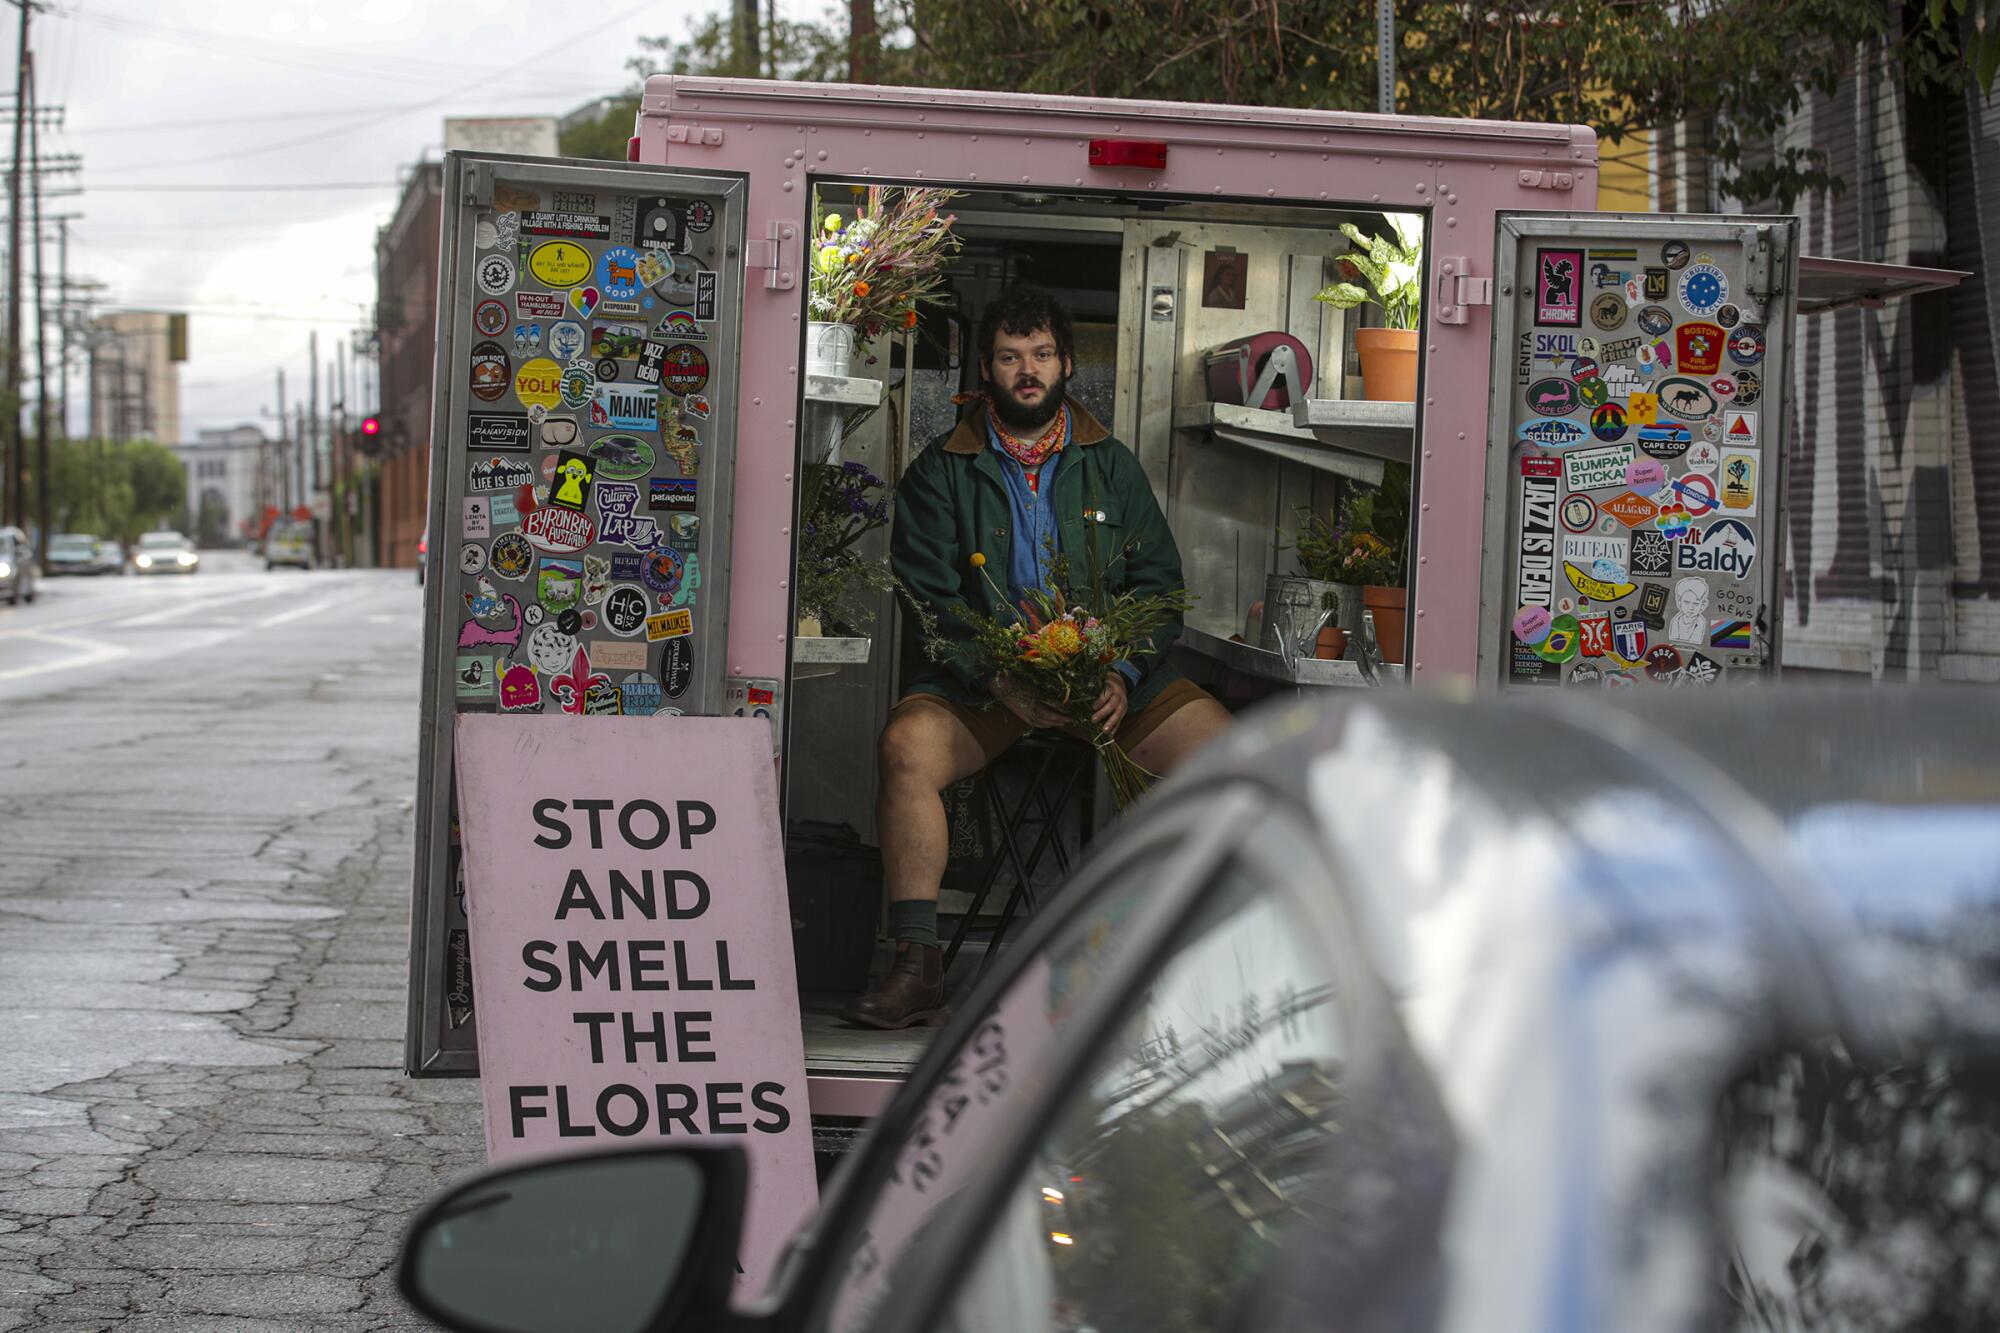 A man sits in the back of an open, pink truck next to a sign reading "Stop and Smell the Flores."